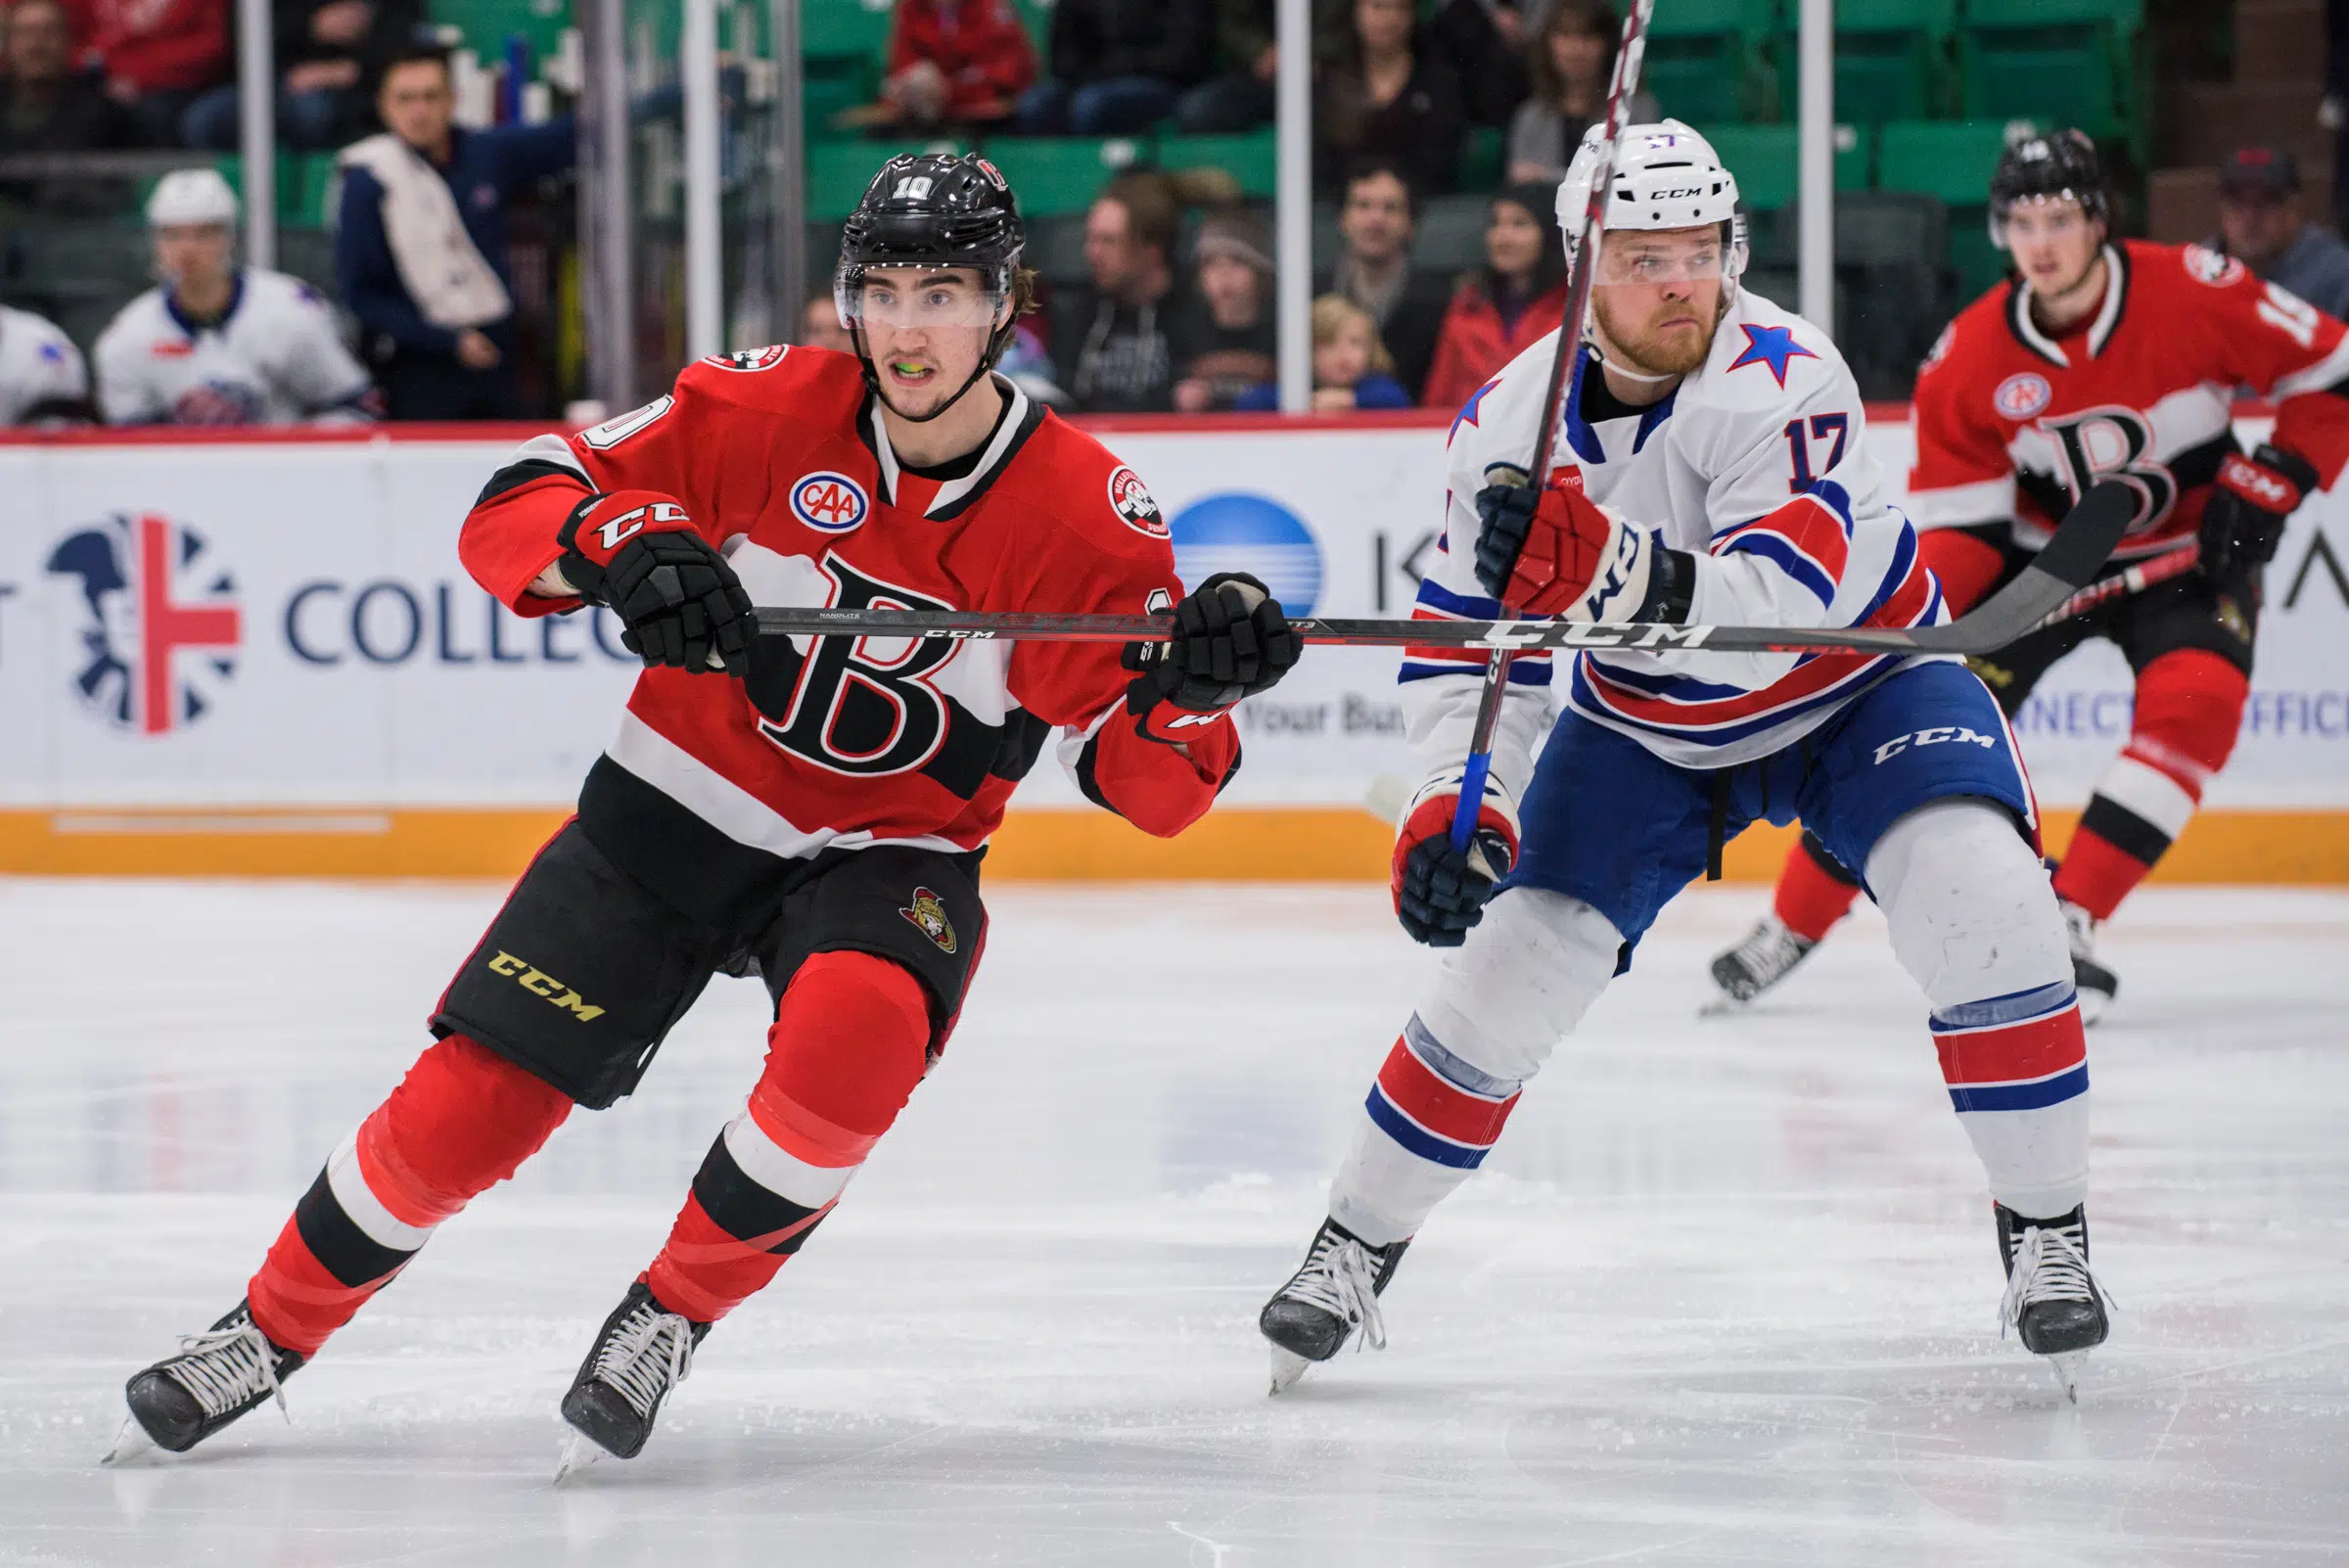 B-Sens move back into playoff spot with win